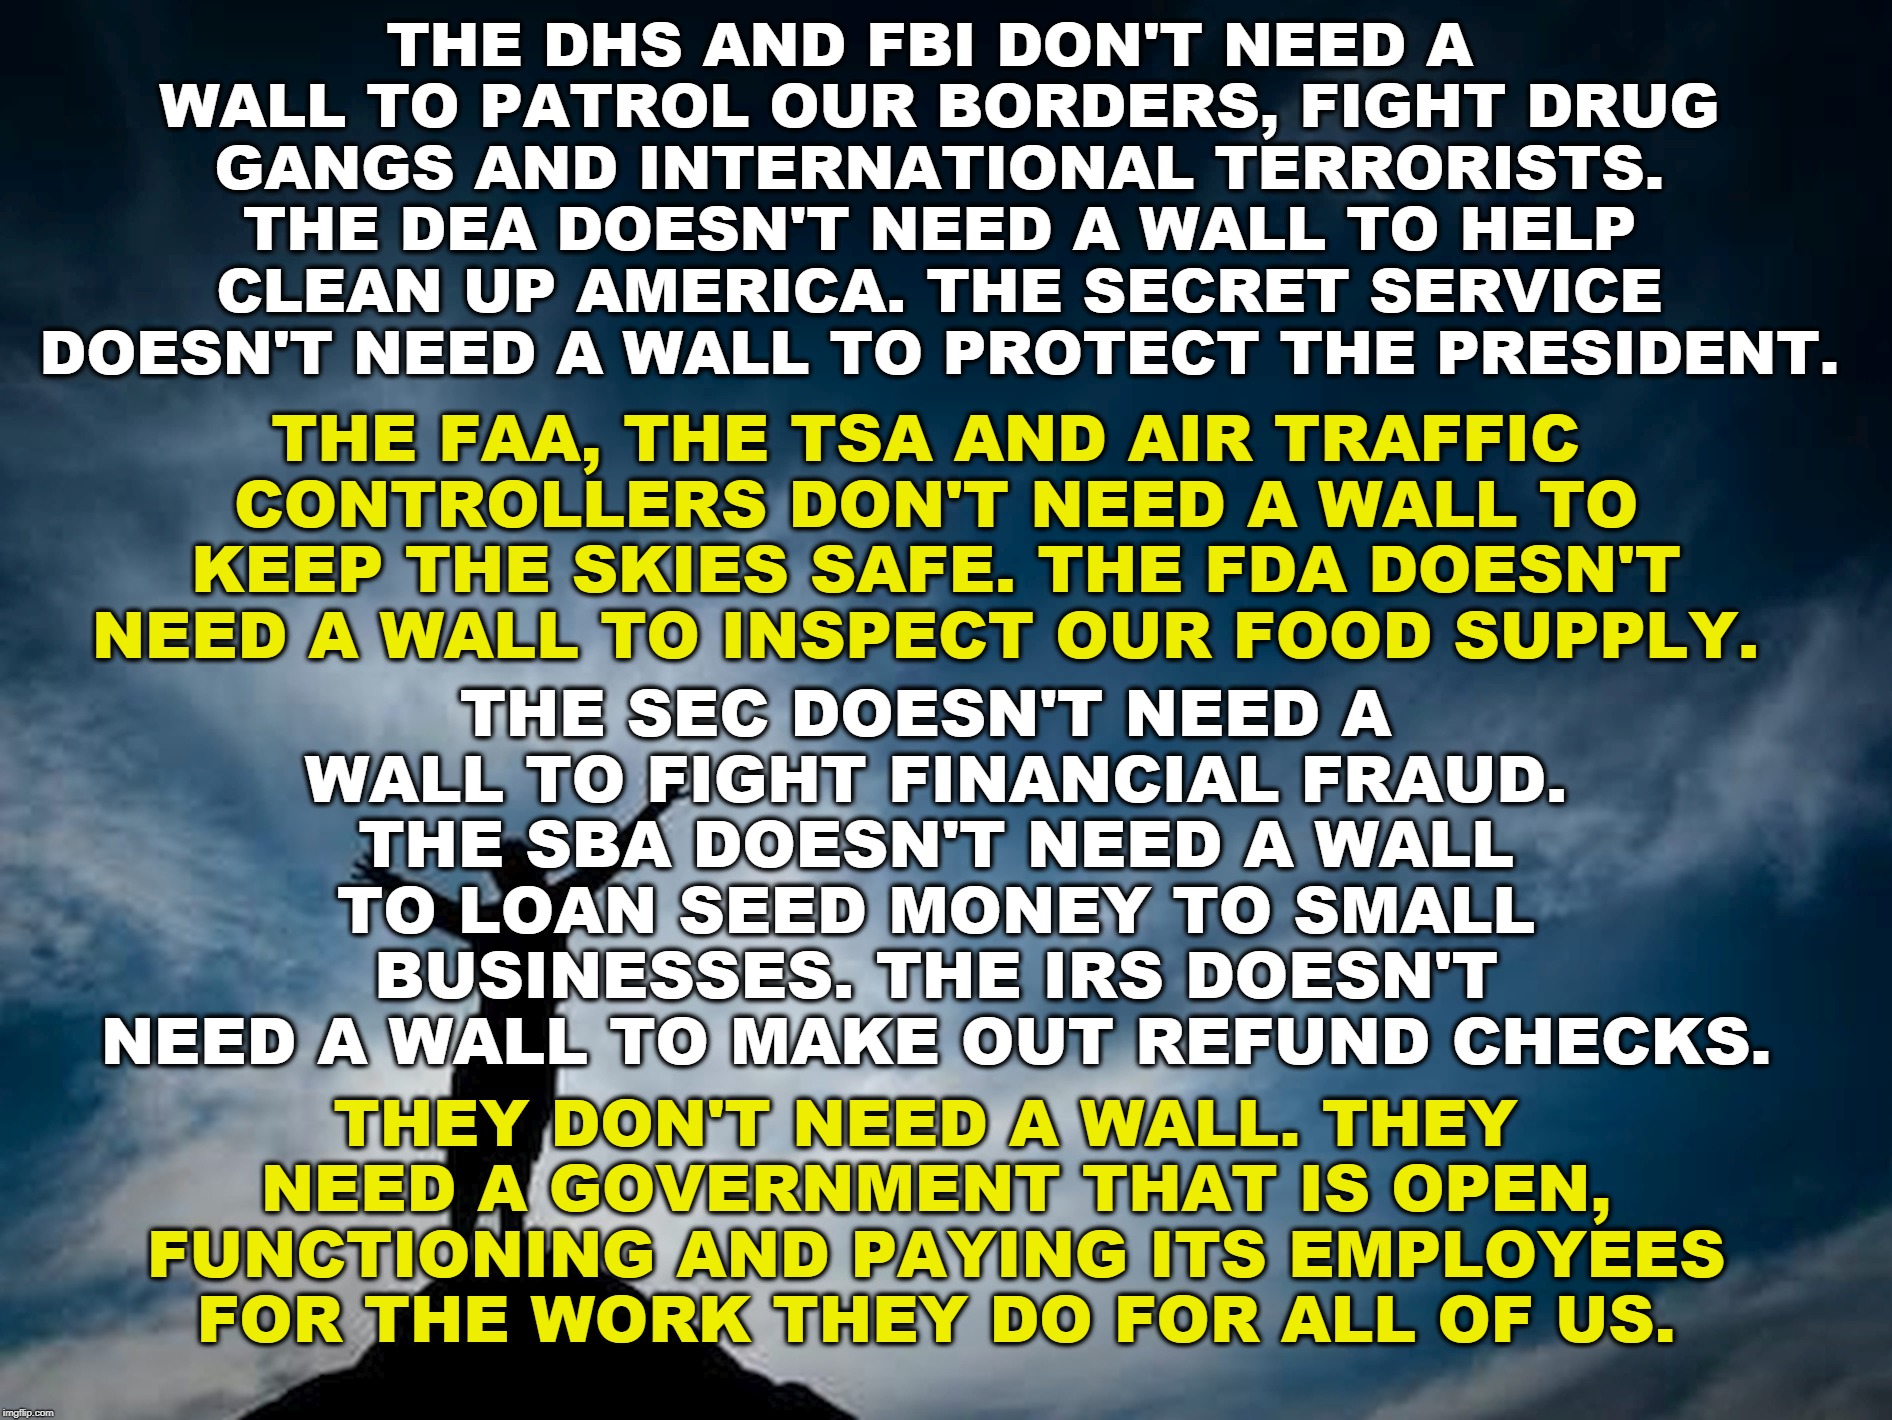 THE DHS AND FBI DON'T NEED A WALL TO PATROL OUR BORDERS, FIGHT DRUG GANGS AND INTERNATIONAL TERRORISTS. THE DEA DOESN'T NEED A WALL TO HELP CLEAN UP AMERICA. THE SECRET SERVICE DOESN'T NEED A WALL TO PROTECT THE PRESIDENT. THE FAA, THE TSA AND AIR TRAFFIC CONTROLLERS DON'T NEED A WALL TO KEEP THE SKIES SAFE. THE FDA DOESN'T NEED A WALL TO INSPECT OUR FOOD SUPPLY. THE SEC DOESN'T NEED A WALL TO FIGHT FINANCIAL FRAUD. THE SBA DOESN'T NEED A WALL TO LOAN SEED MONEY TO SMALL BUSINESSES. THE IRS DOESN'T NEED A WALL TO MAKE OUT REFUND CHECKS. THEY DON'T NEED A WALL. THEY NEED A GOVERNMENT THAT IS OPEN, FUNCTIONING AND PAYING ITS EMPLOYEES FOR THE WORK THEY DO FOR ALL OF US. | image tagged in fbi,dhs,dea,secret service,fda,wall | made w/ Imgflip meme maker